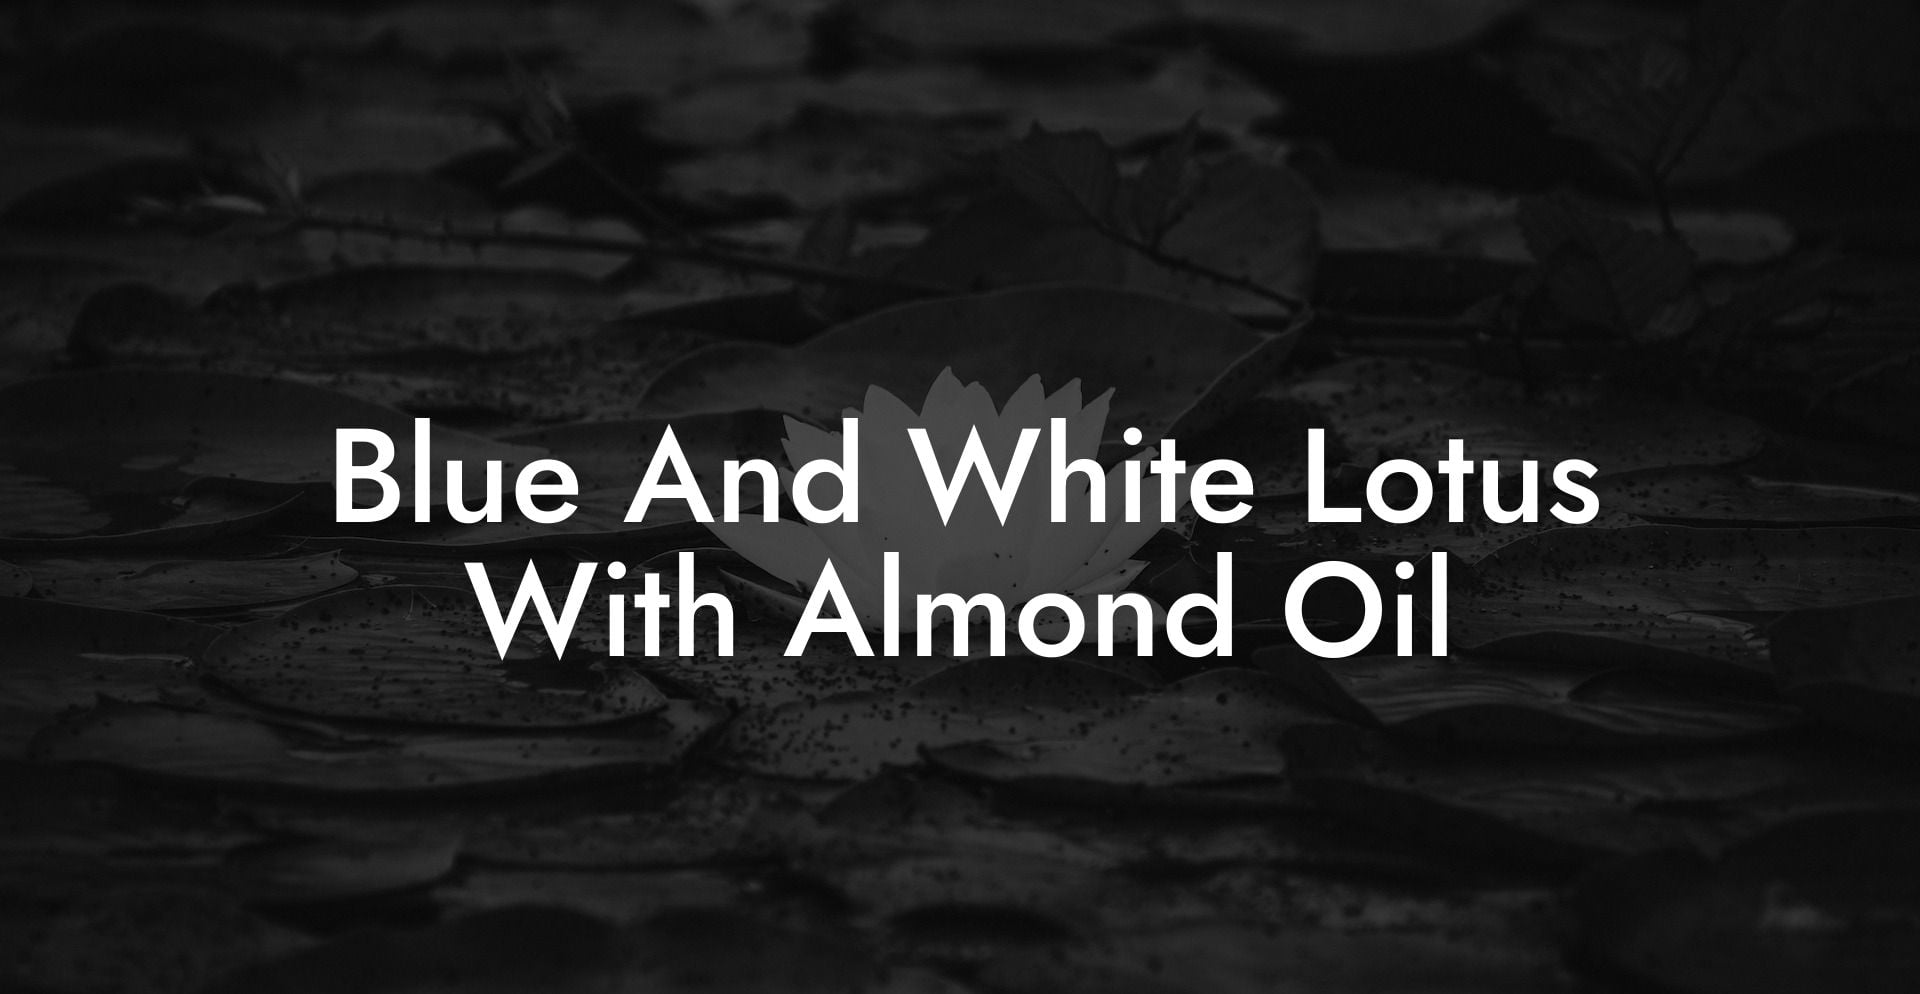 Blue And White Lotus With Almond Oil